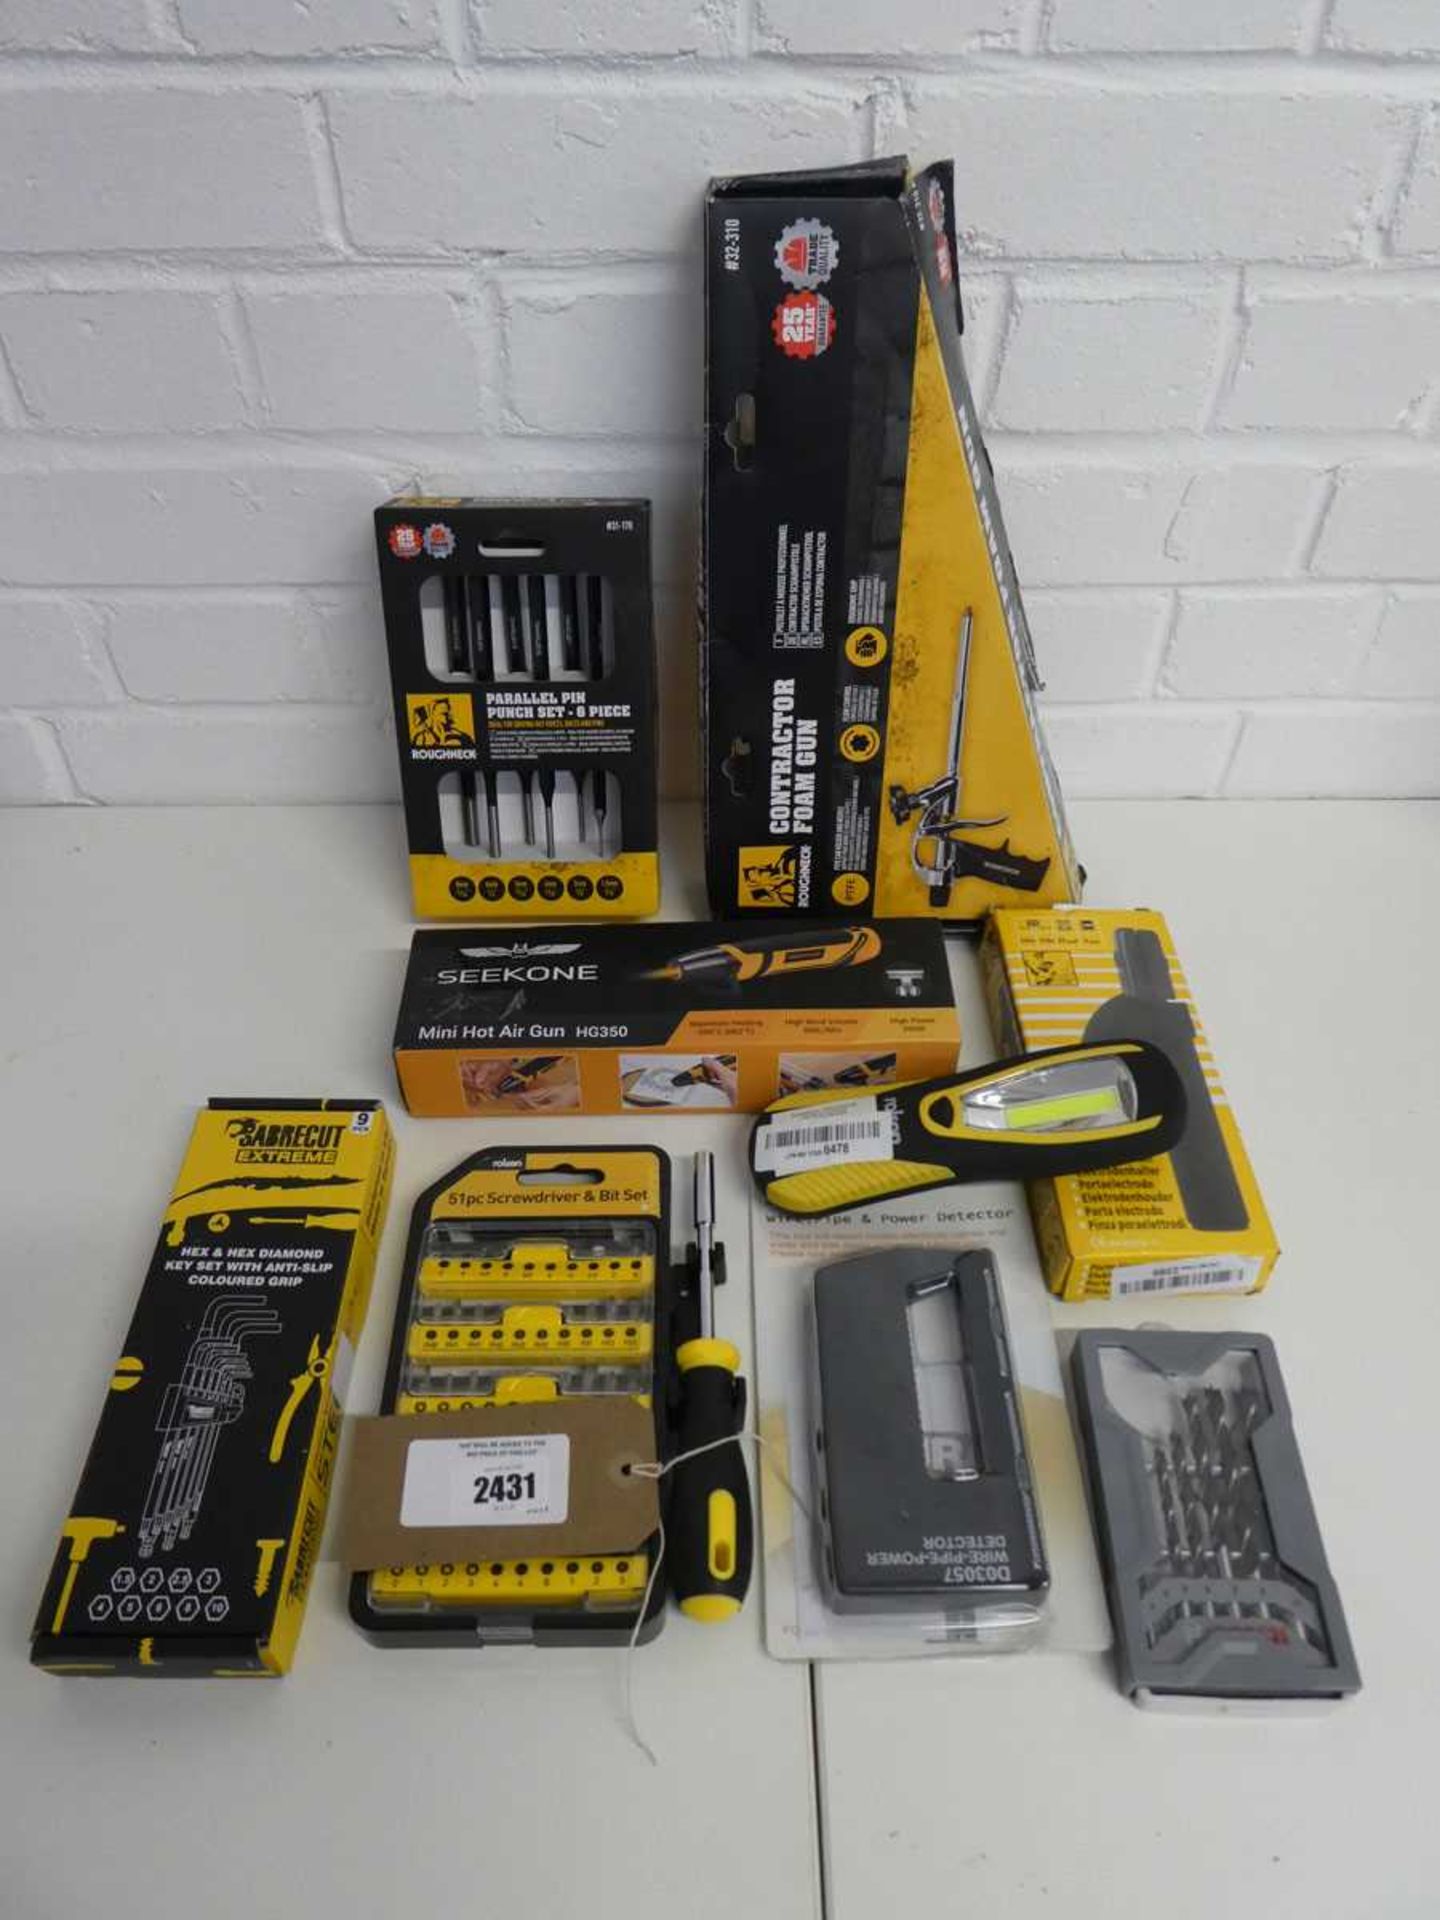 +VAT Various tools including; Sabrecut extreme hex set, pipe detector, Bosch drill bits, Rolson